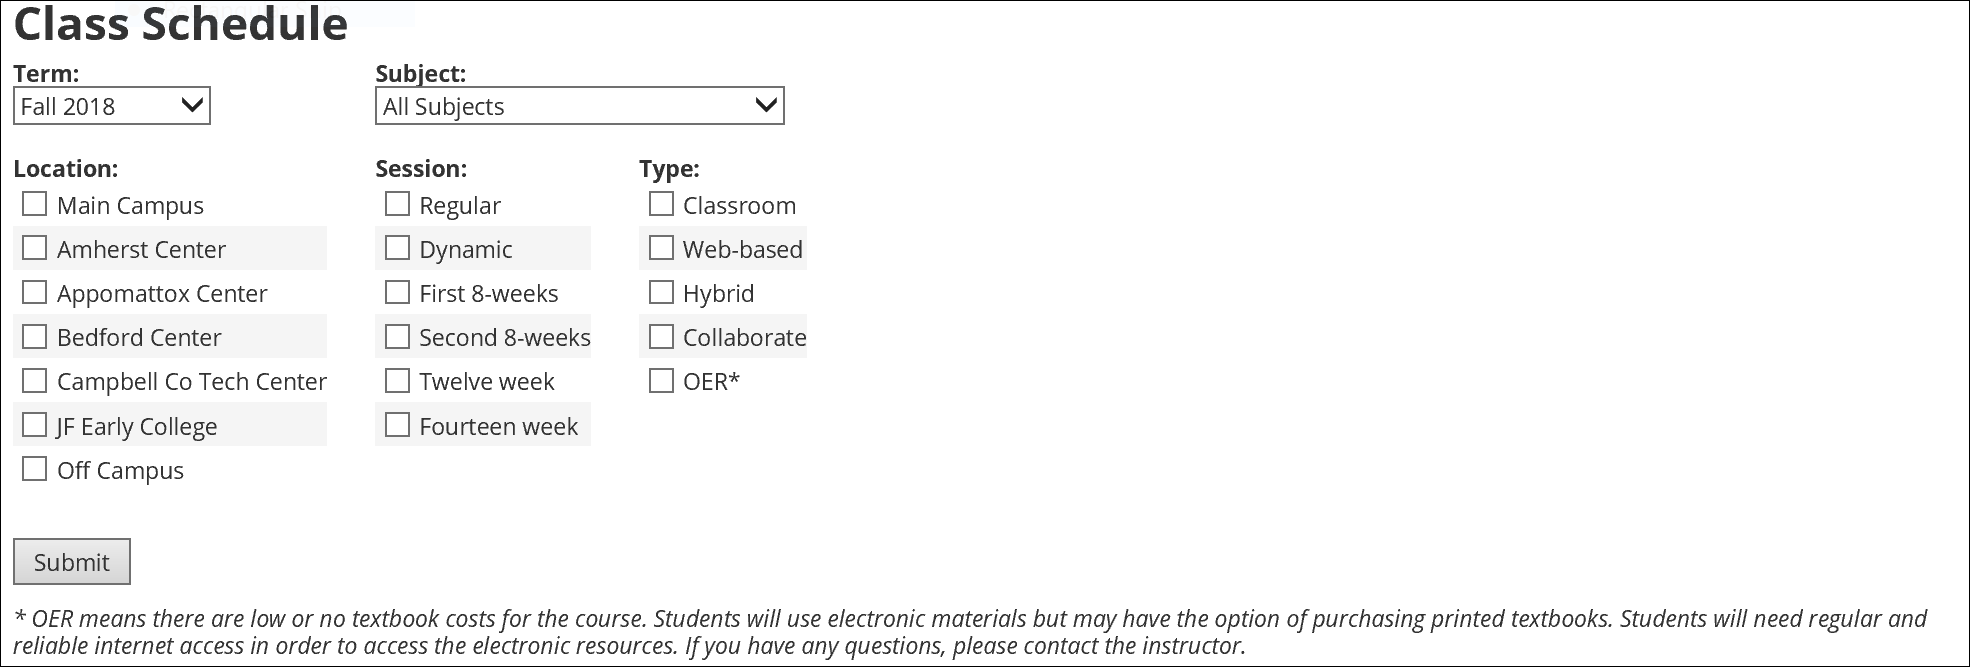 class schedule search interface with OER listed as a type of course